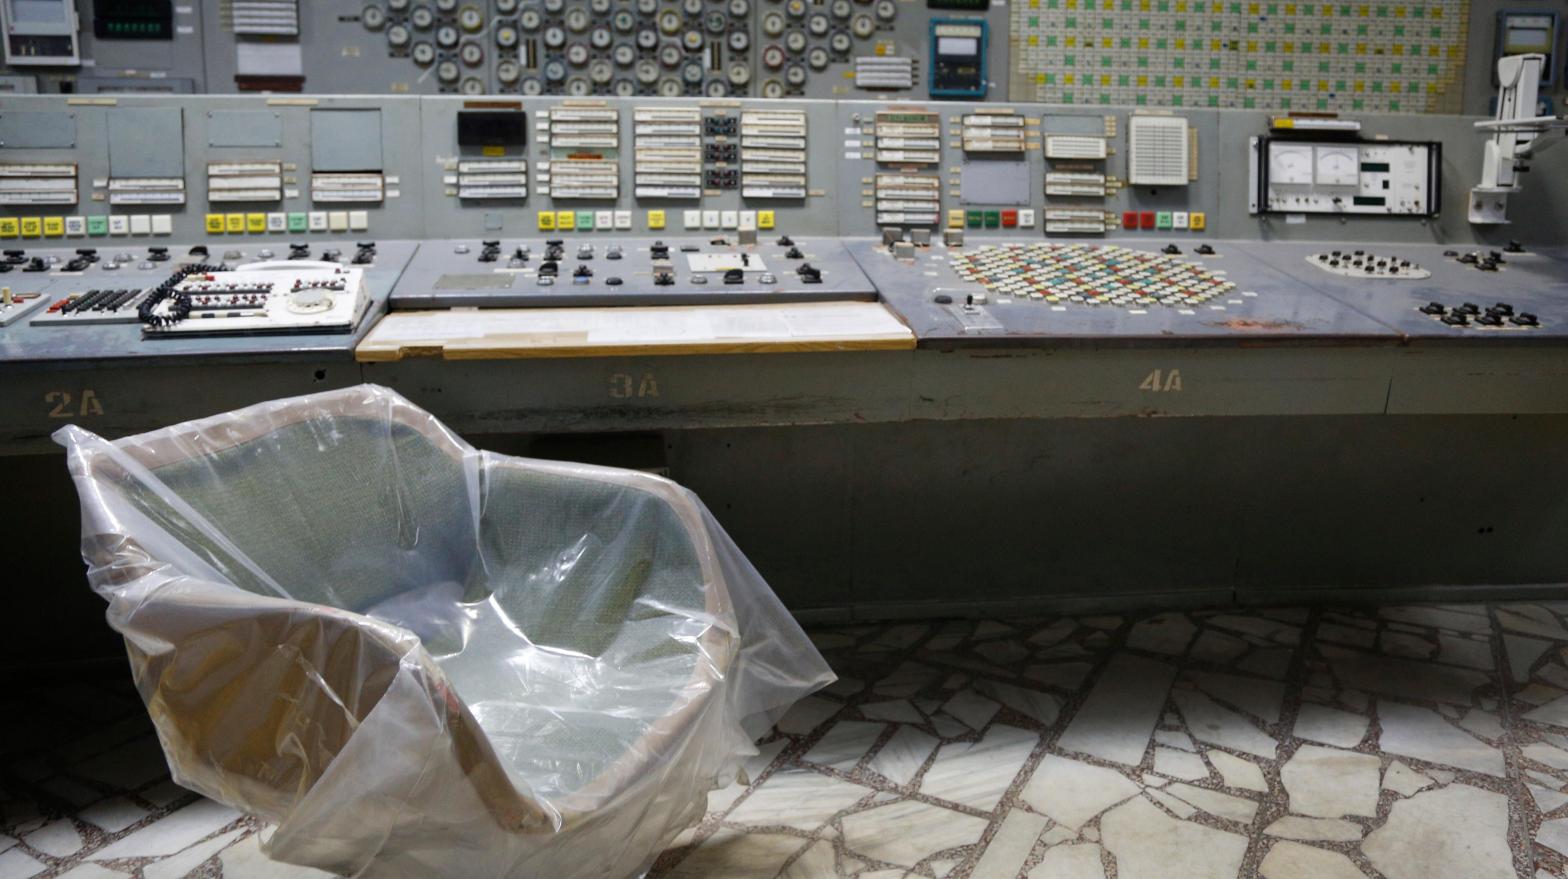 An operator's arm-chair covered with plastic sits in an empty control room of the 3rd reactor at the Chernobyl nuclear plant, in Chernobyl, Ukraine, on April 20, 2018.  (Photo: Efrem Lukatsky, AP)